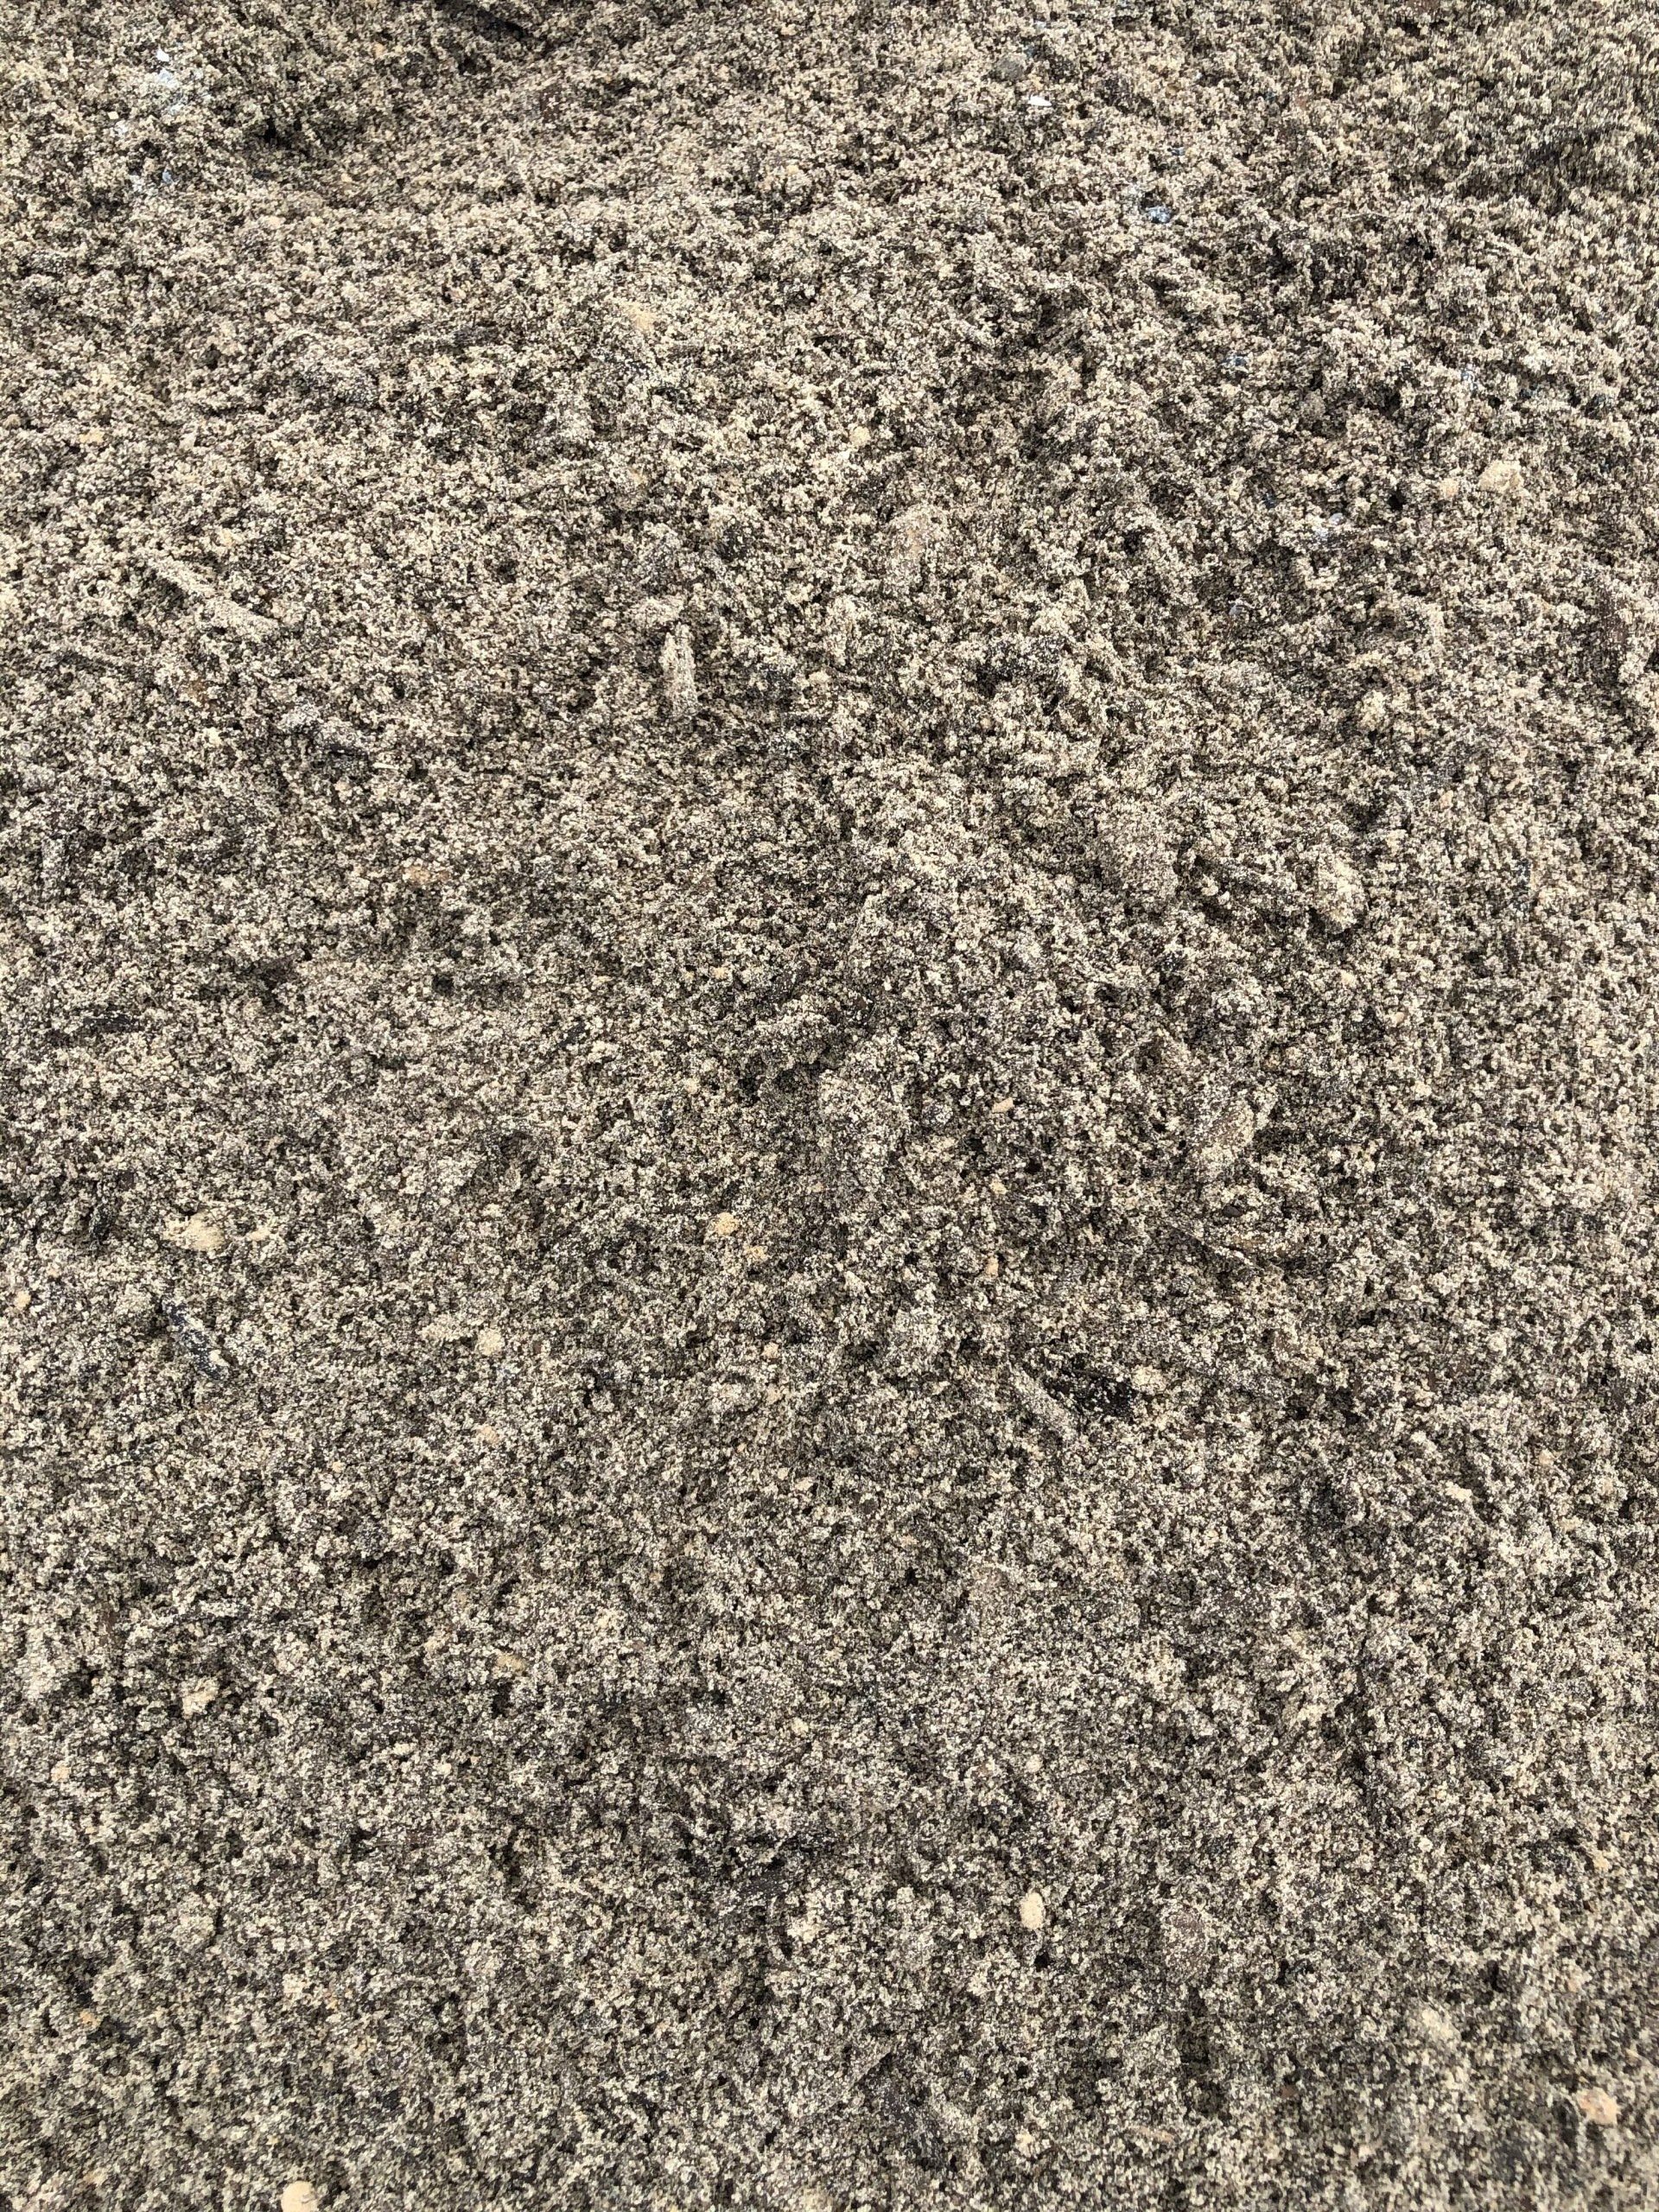 Fill Sand - Sand and soil products in Florida